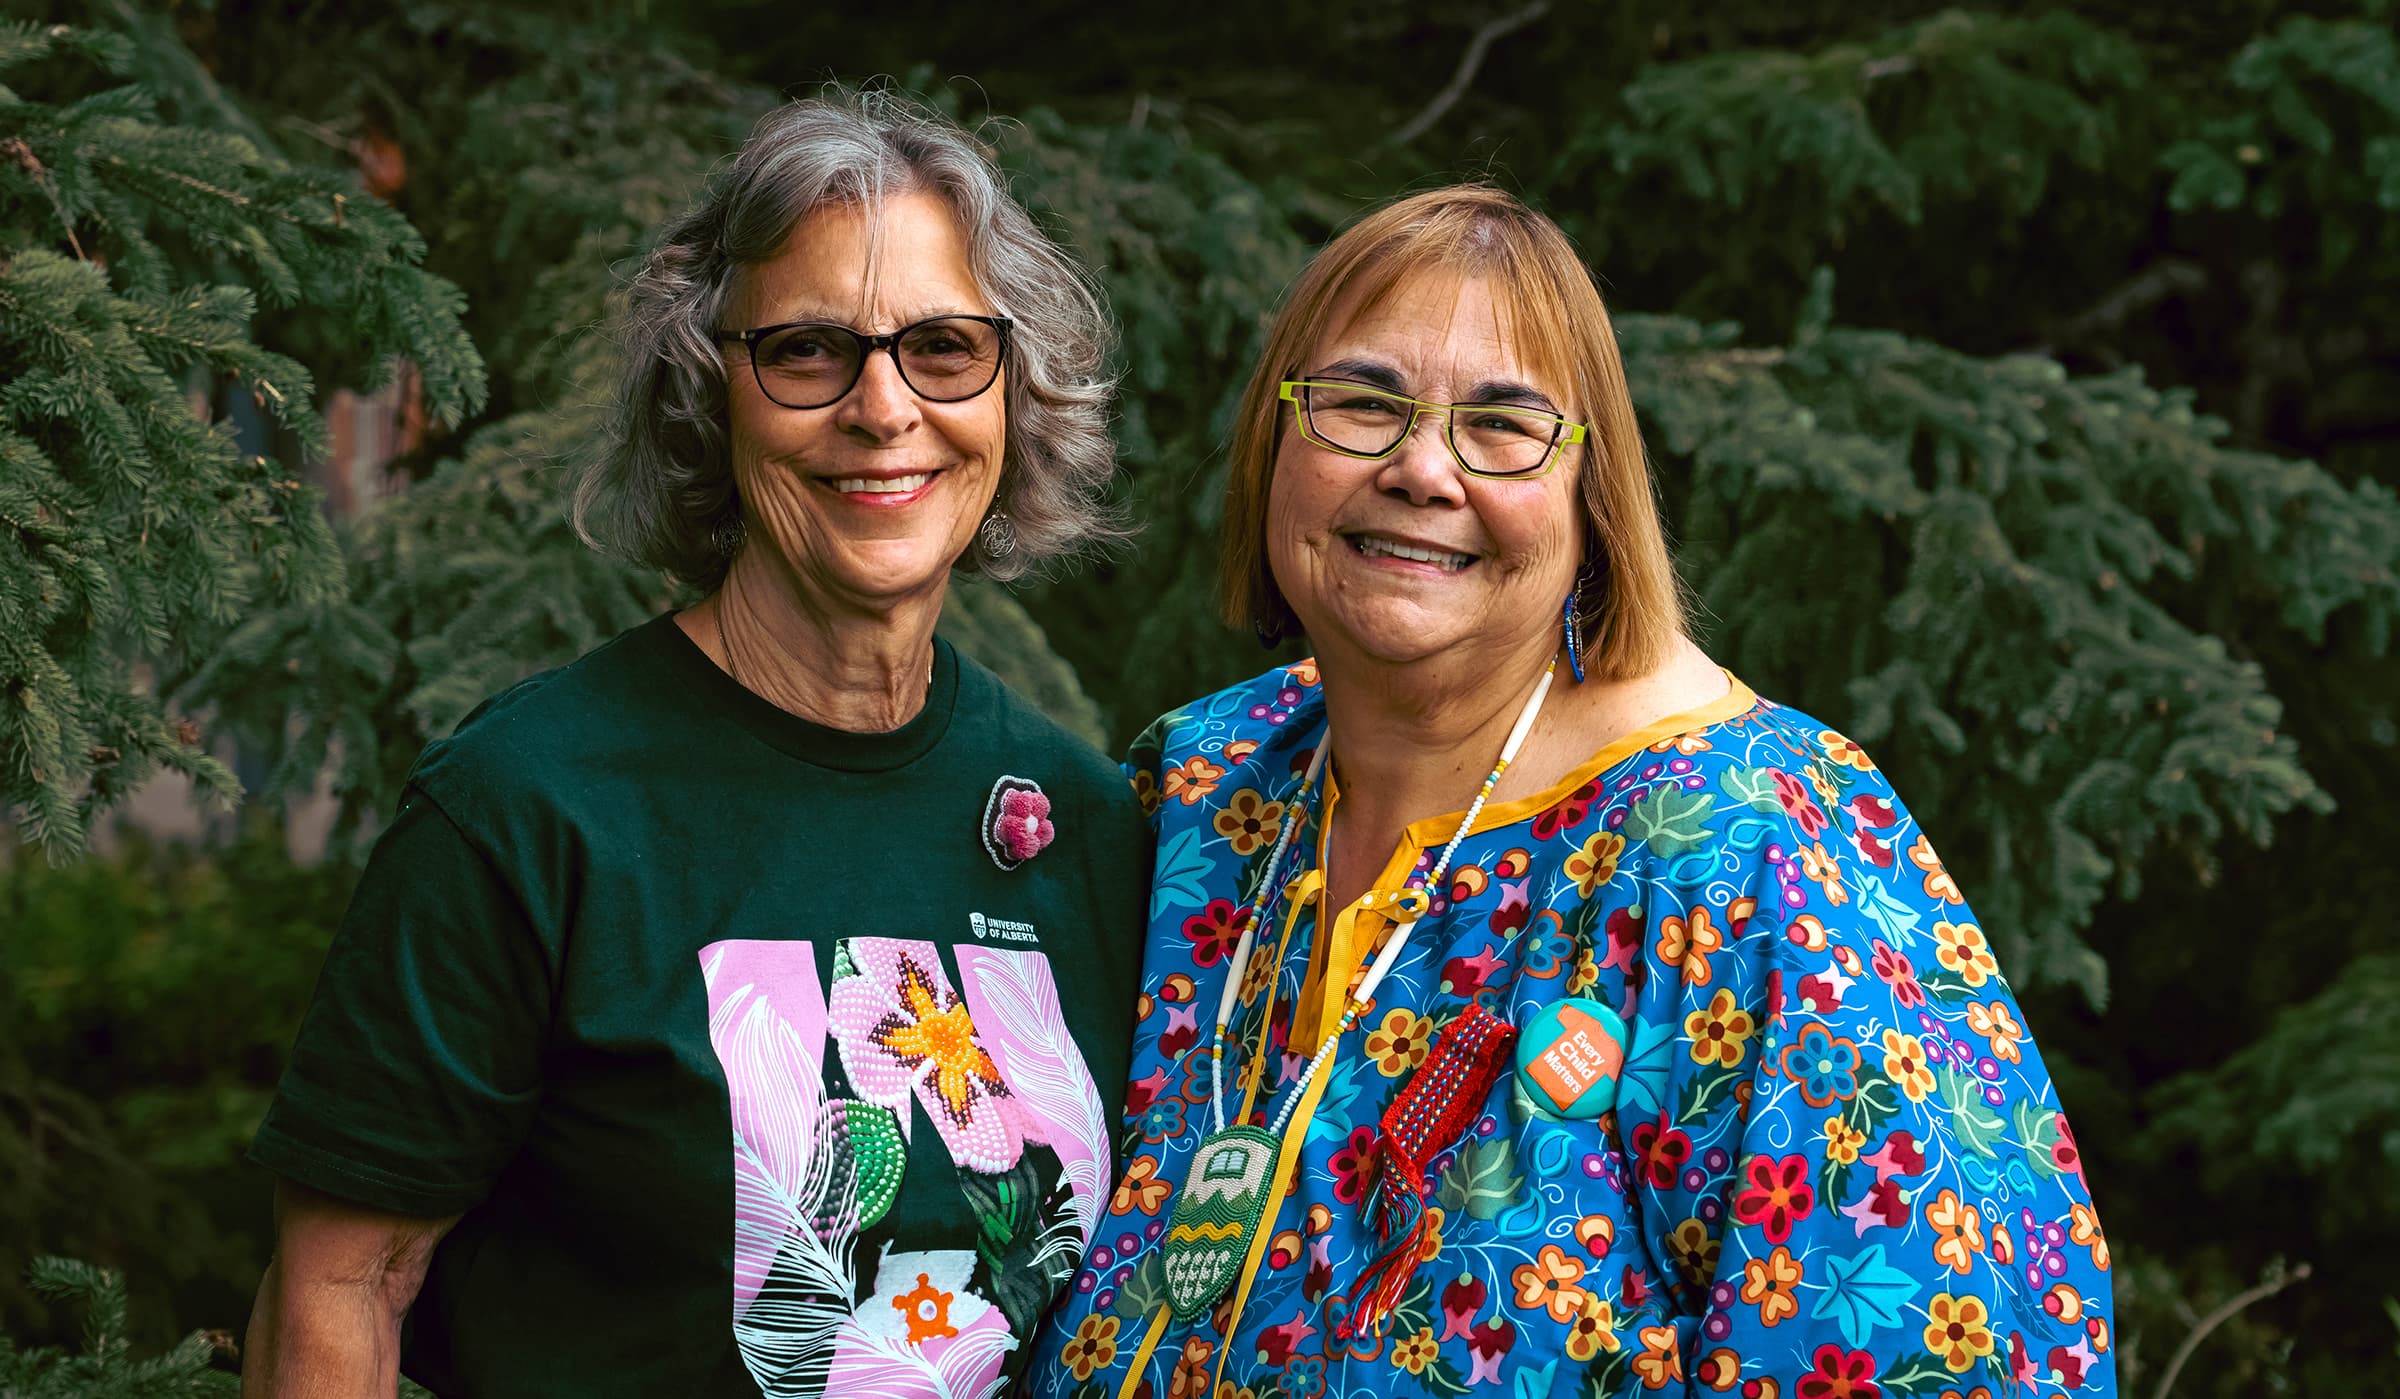 Alumna Dorothy Sutton and Florence Glanfield, vice-provost of Indigenous programming and research, before the event.